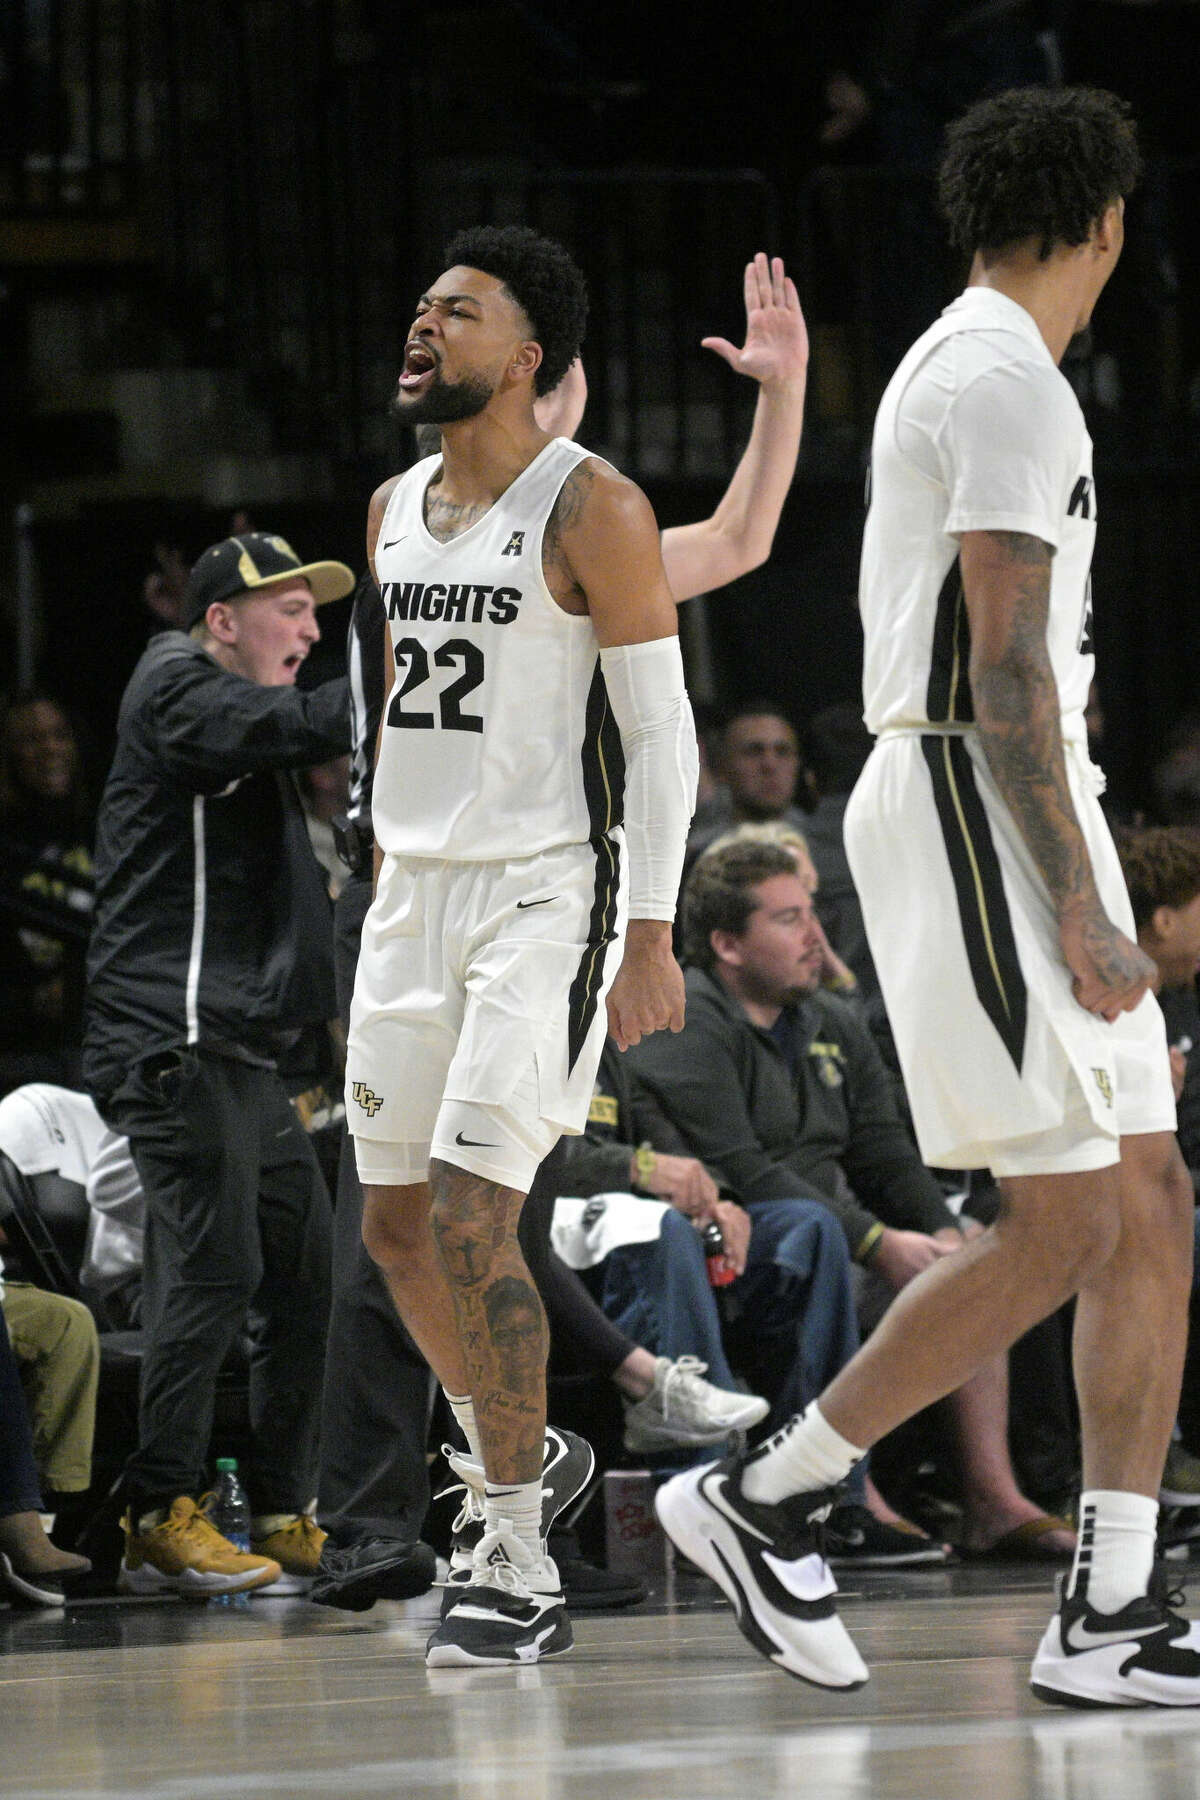 Central Florida guard Darin Green Jr. (22) celebrates after scoring a 3-point basket during the first half of an NCAA college basketball game against Houston, Saturday, Jan. 29, 2022, in Orlando, Fla. (AP Photo/Phelan M. Ebenhack)